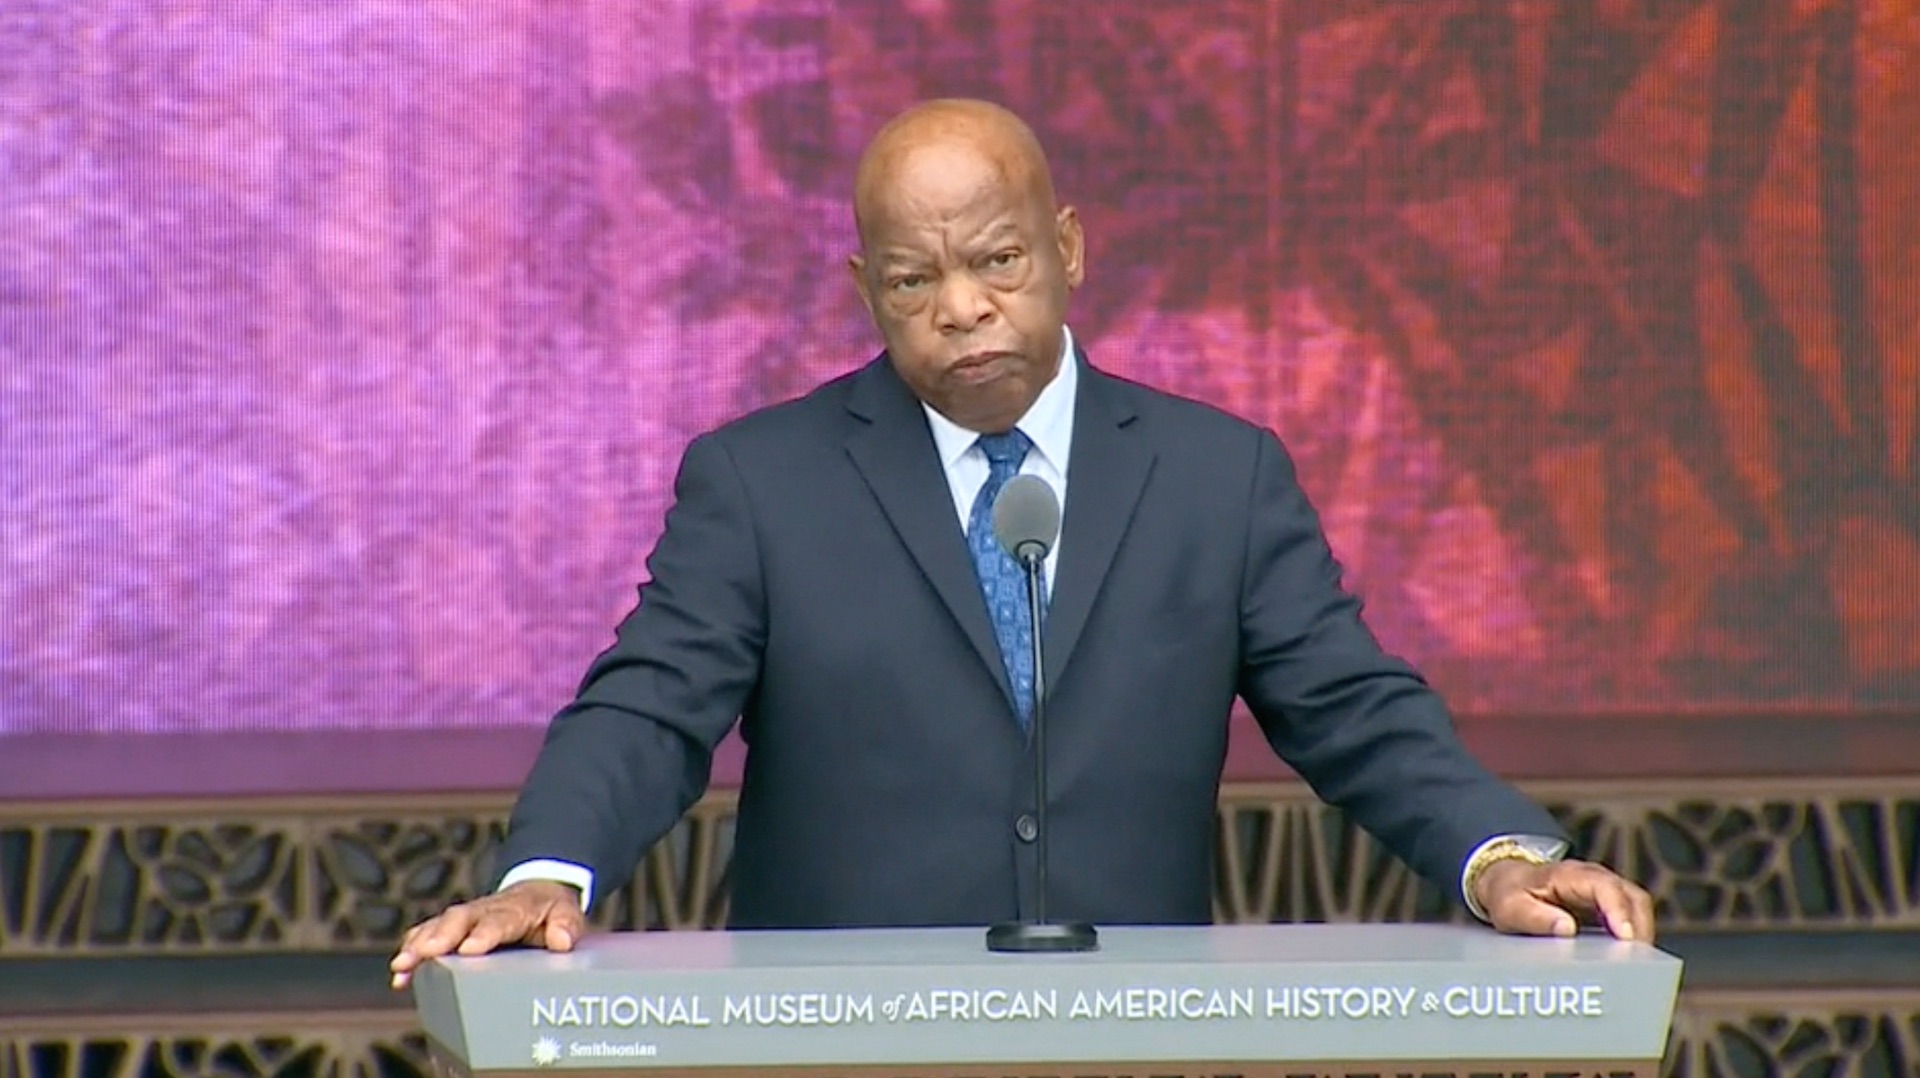 Rep John Lewis There Were Some Who Said We Couldnt Make It Happen But We Did It - 